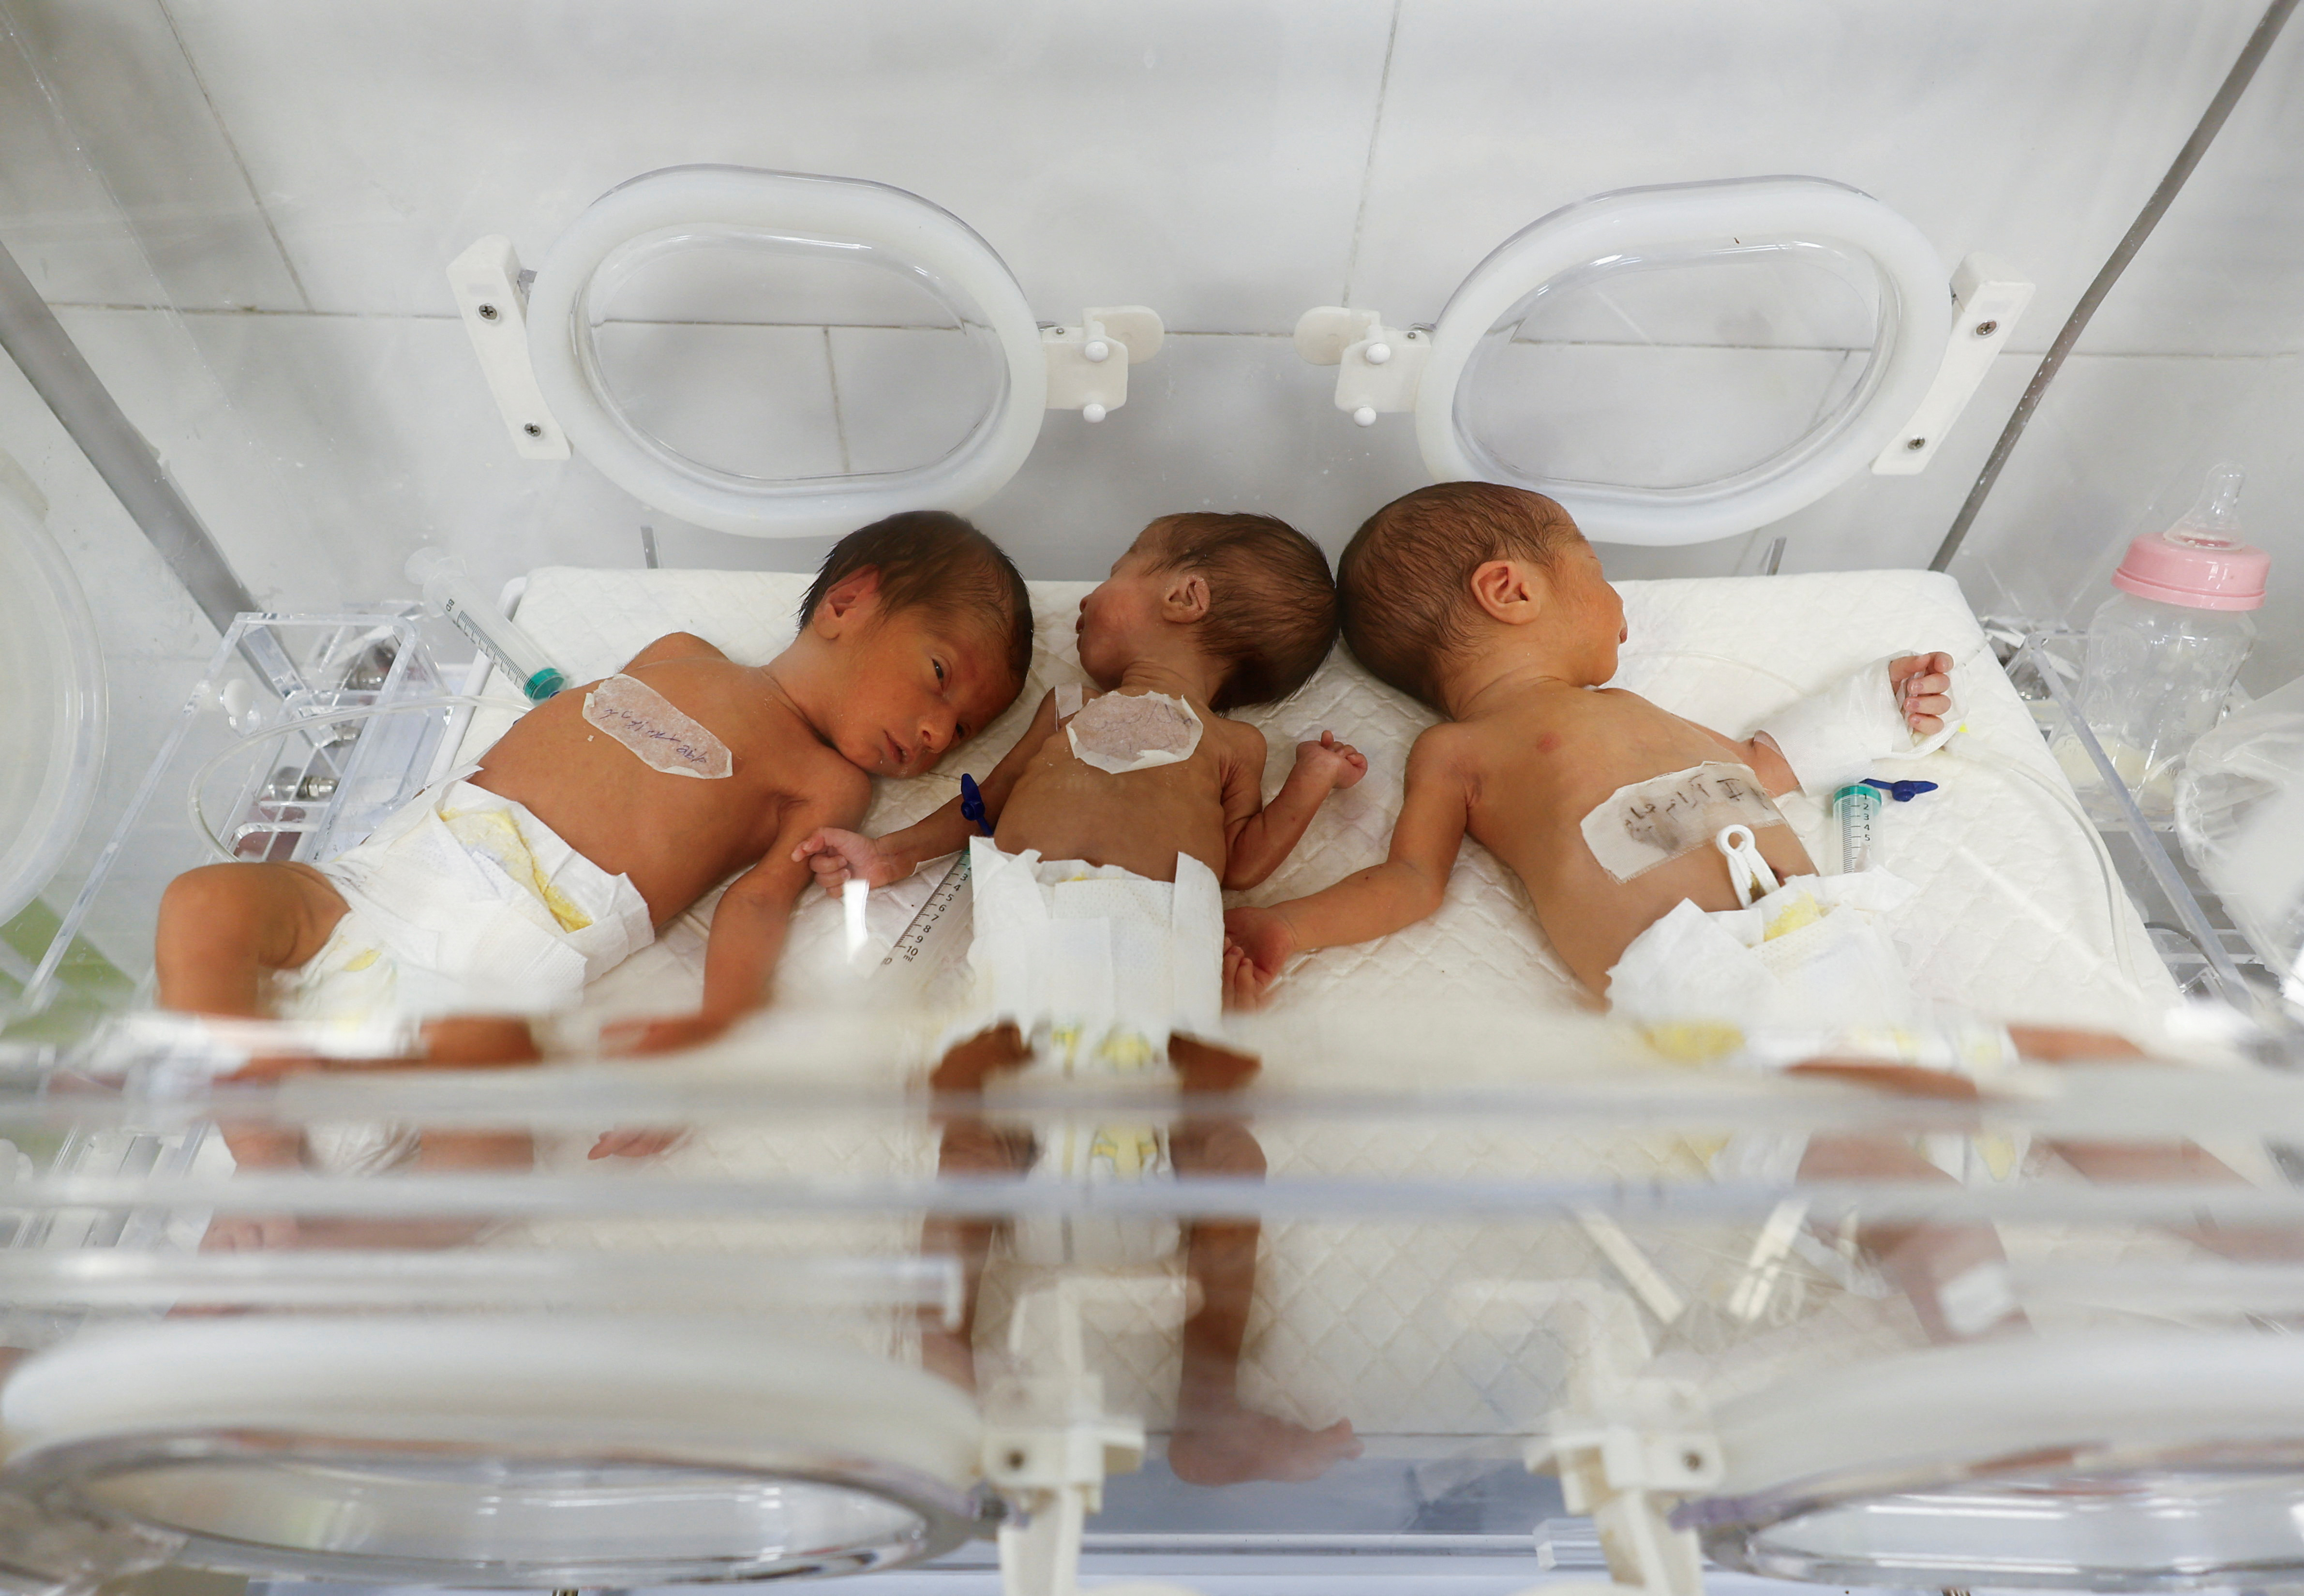 Palestinian babies lie in one incubator due to the limited capacity at the newborns' intensive care unit at Al-Emirati hospital in Rafah in the southern Gaza Strip